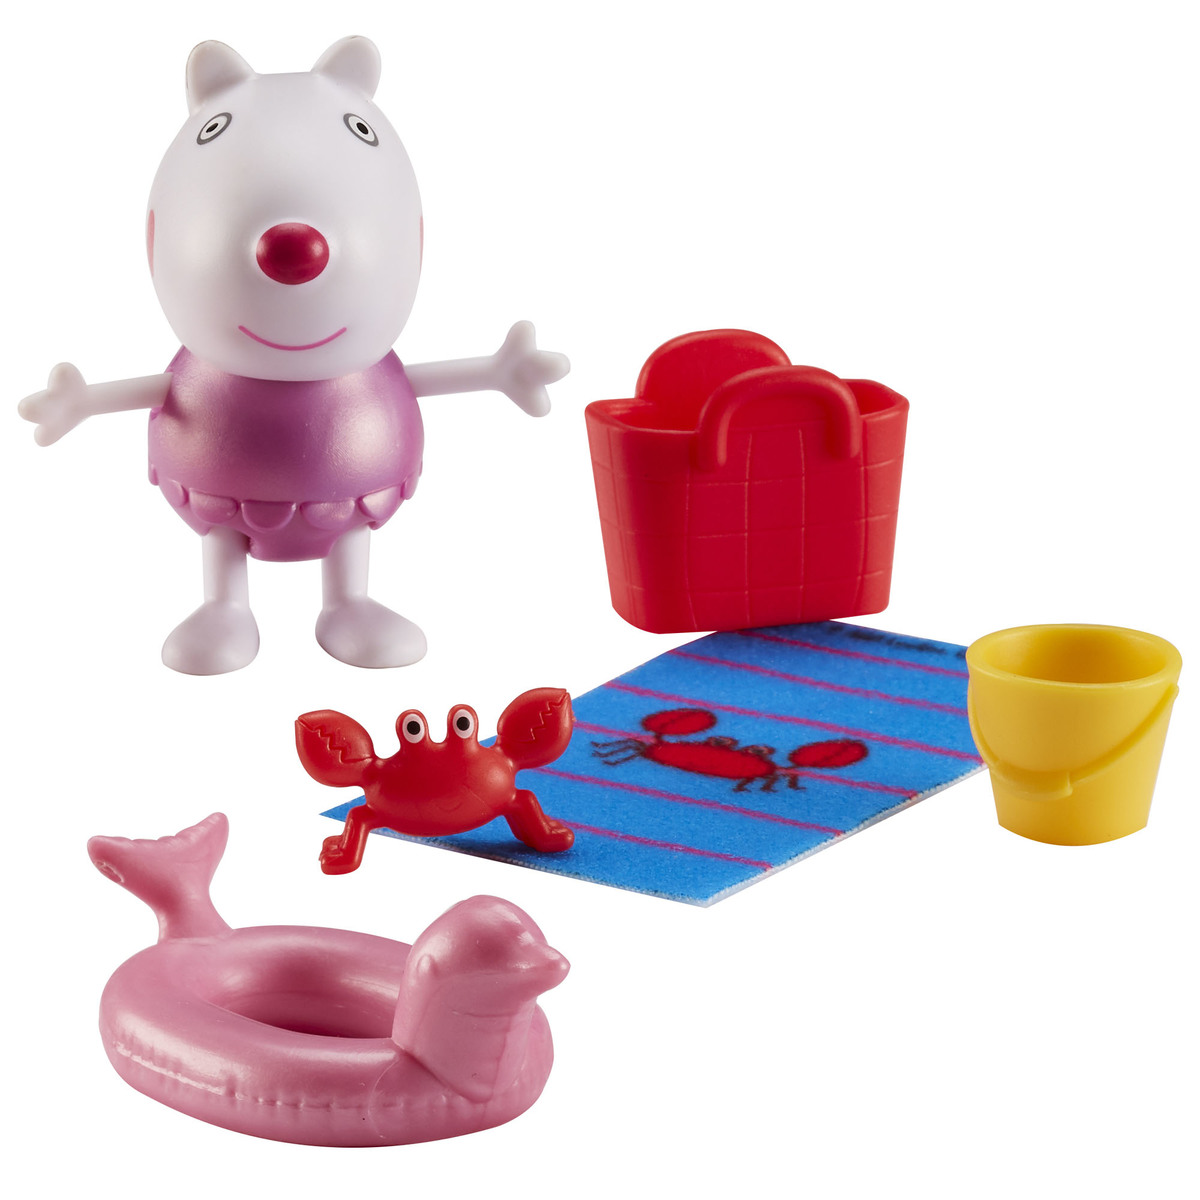 Peppa Pig Exclusive Beach Vacation Family Figure Set